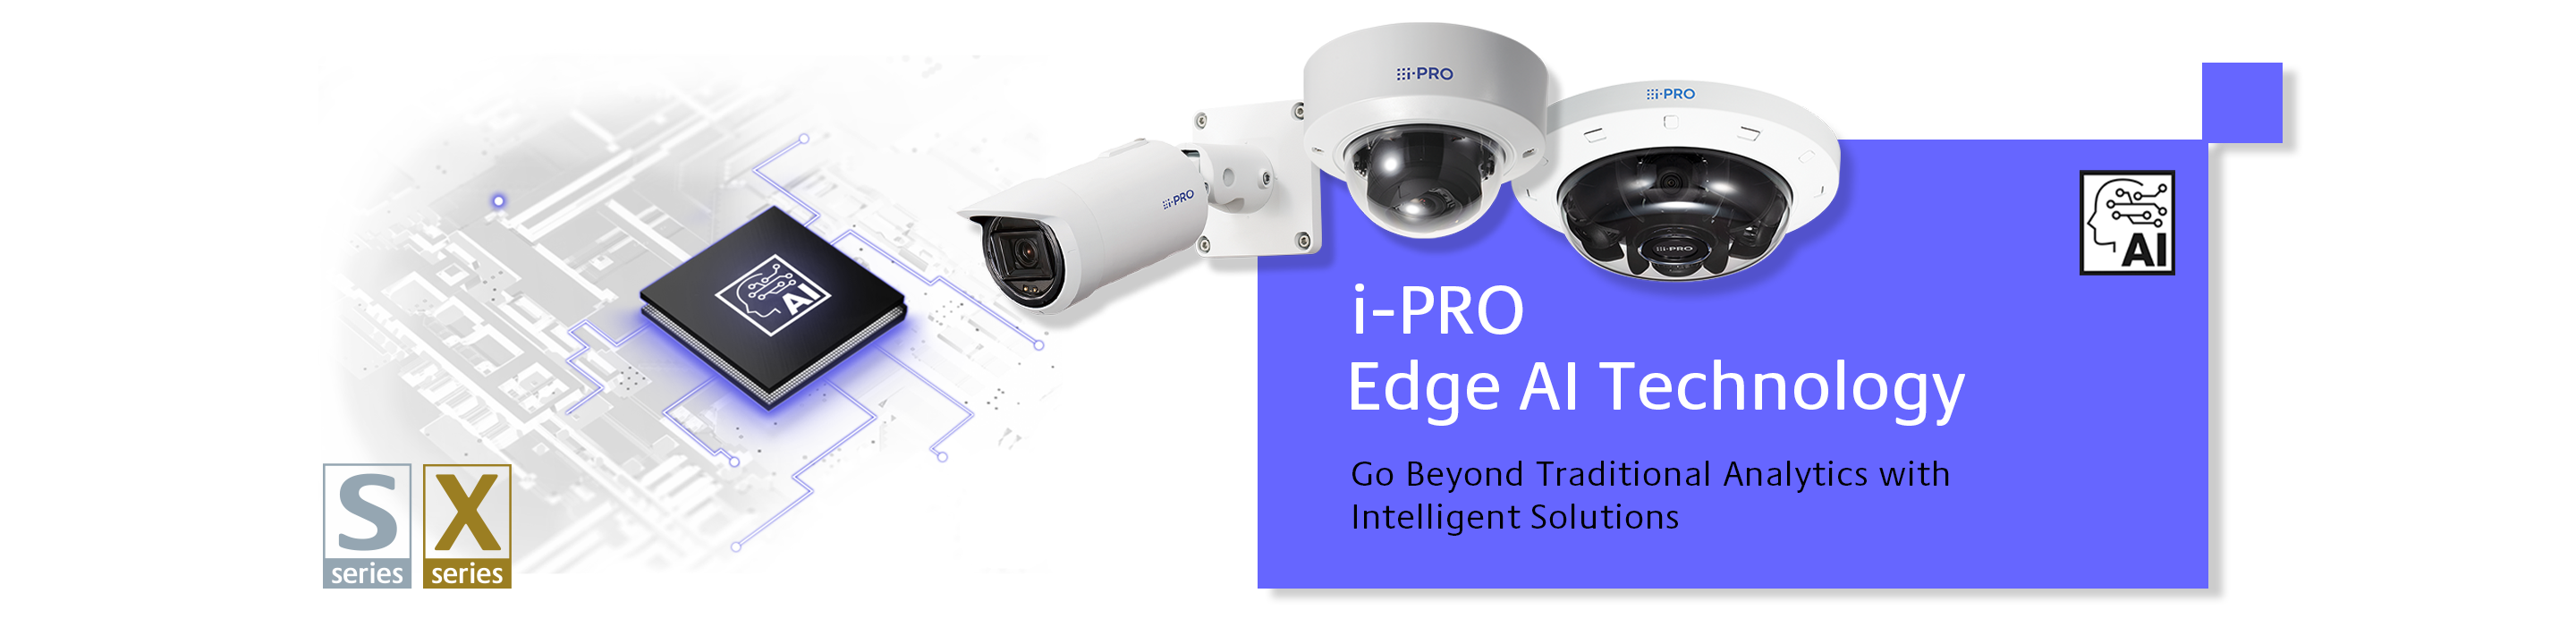 https://i-pro.com/products_and_solutions/sites/default/files/2023-02/i-PRO%20Edge%20AI%20Technology_KV.png